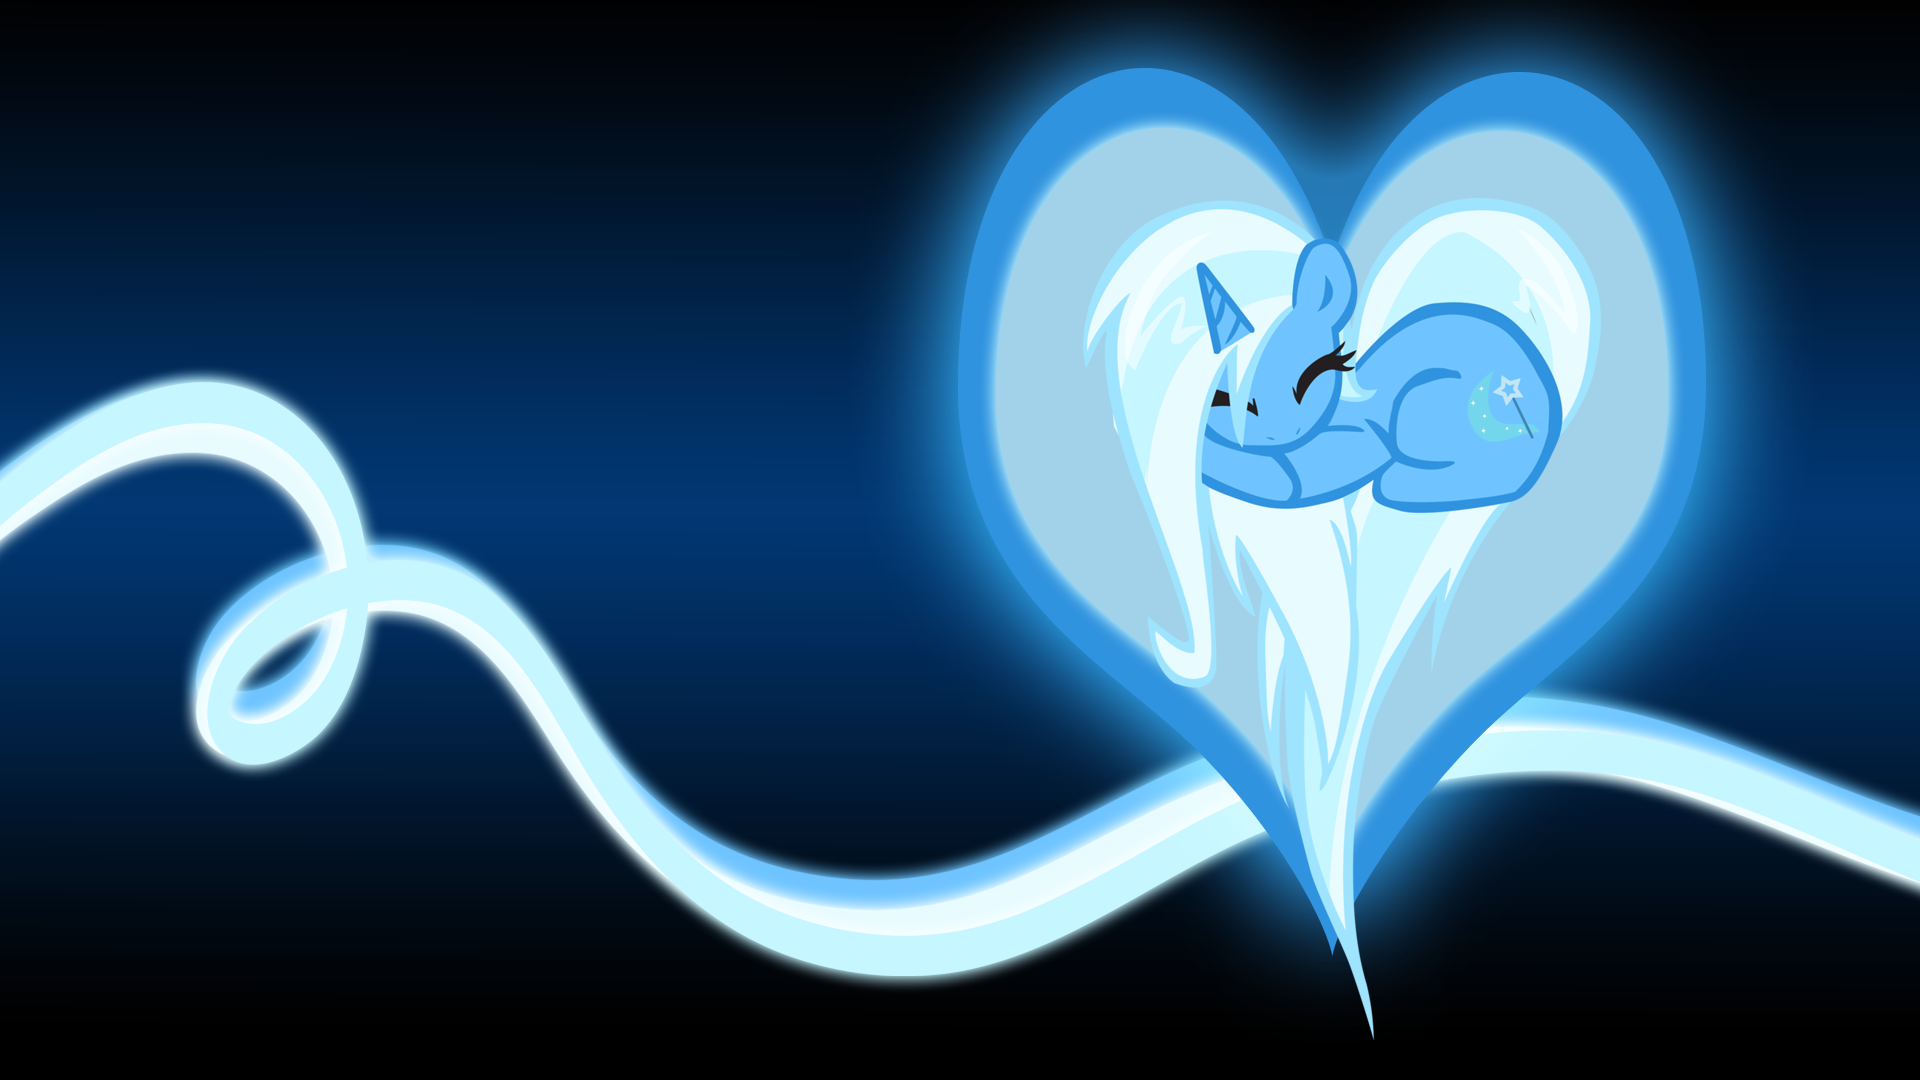 Trixie Heart Background by BambooDog and SirPayne